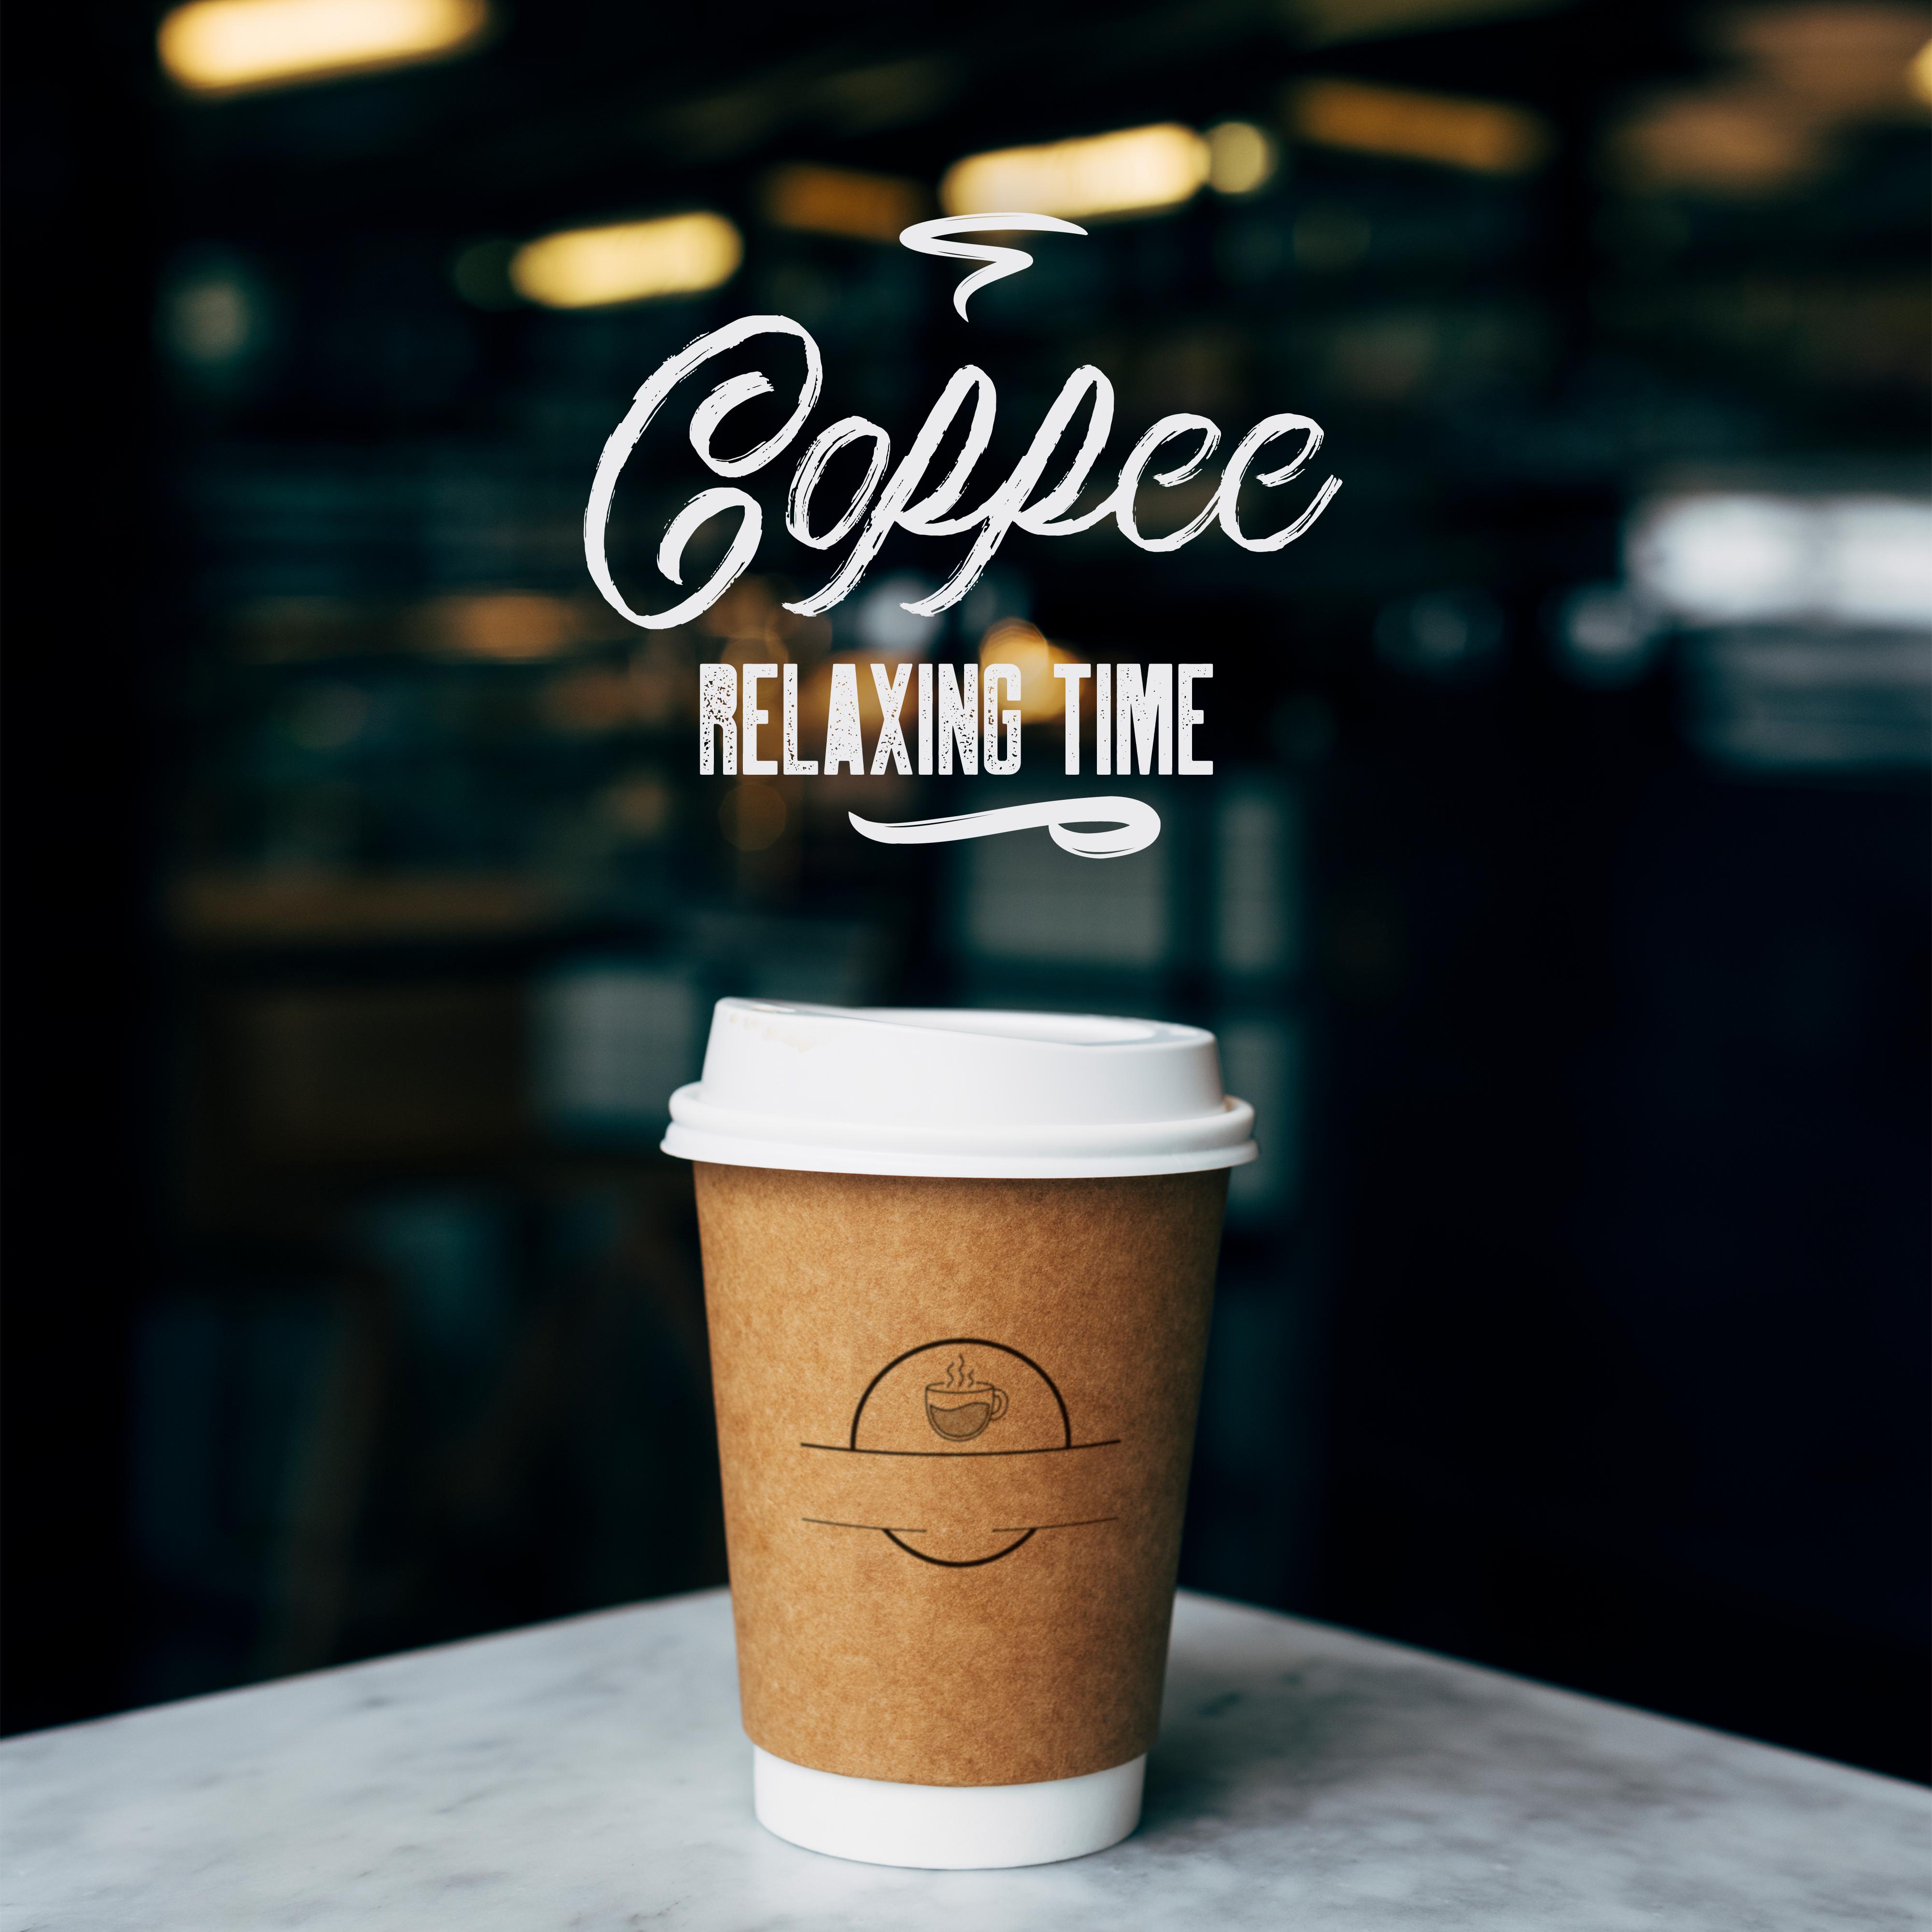 Coffee Relaxing Time – Instrumental Jazz Music Ambient, Relaxing Sounds After Work